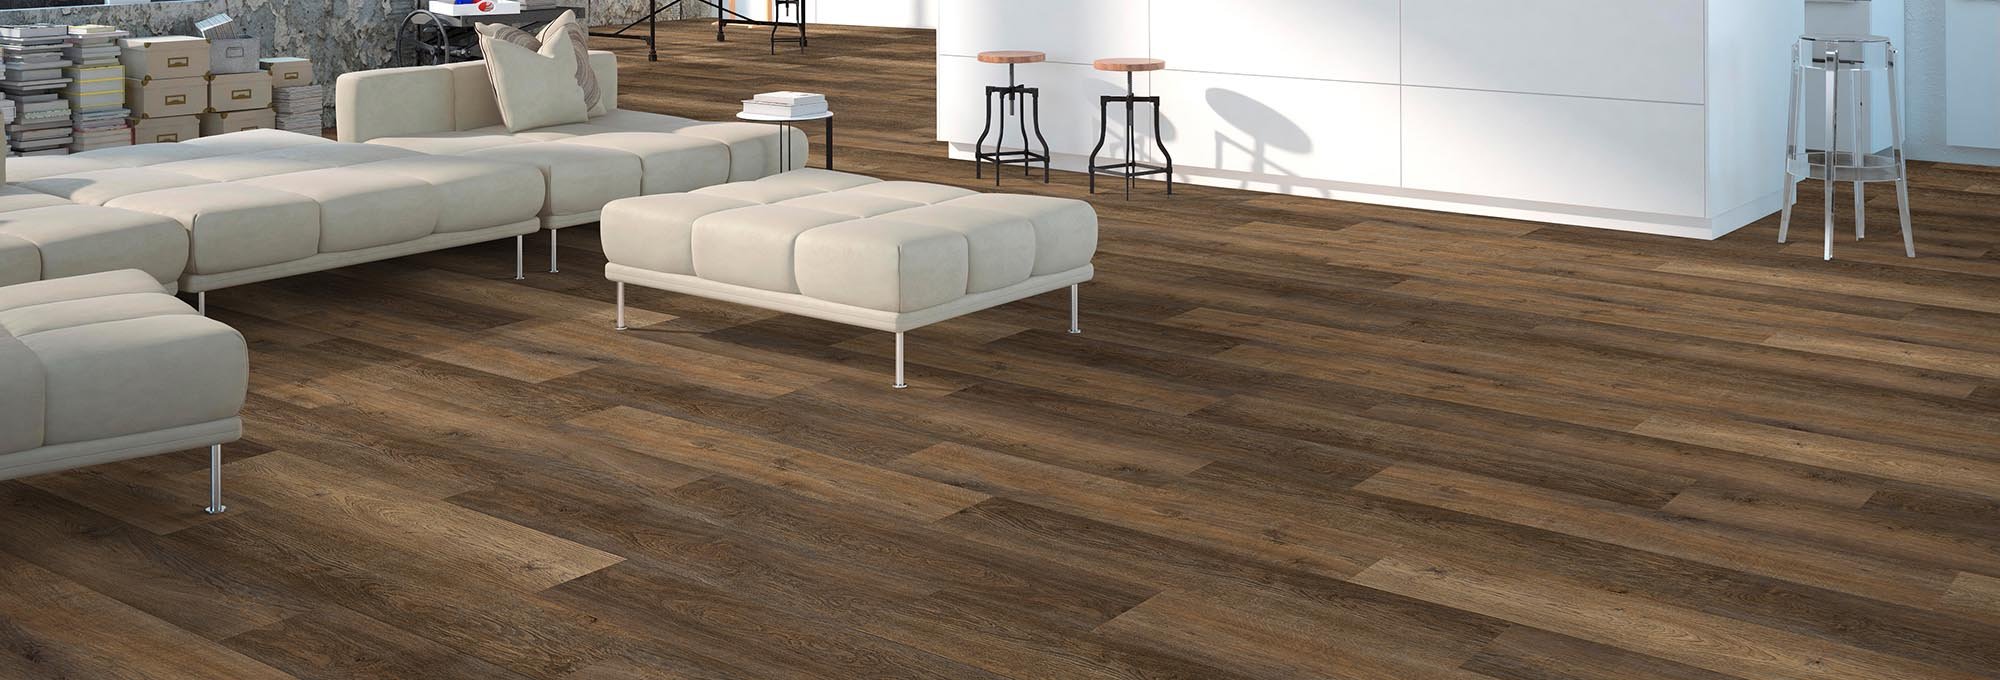 Shop Flooring Products from CarpetsPlus of St. Louis in St. Louis, Missouri